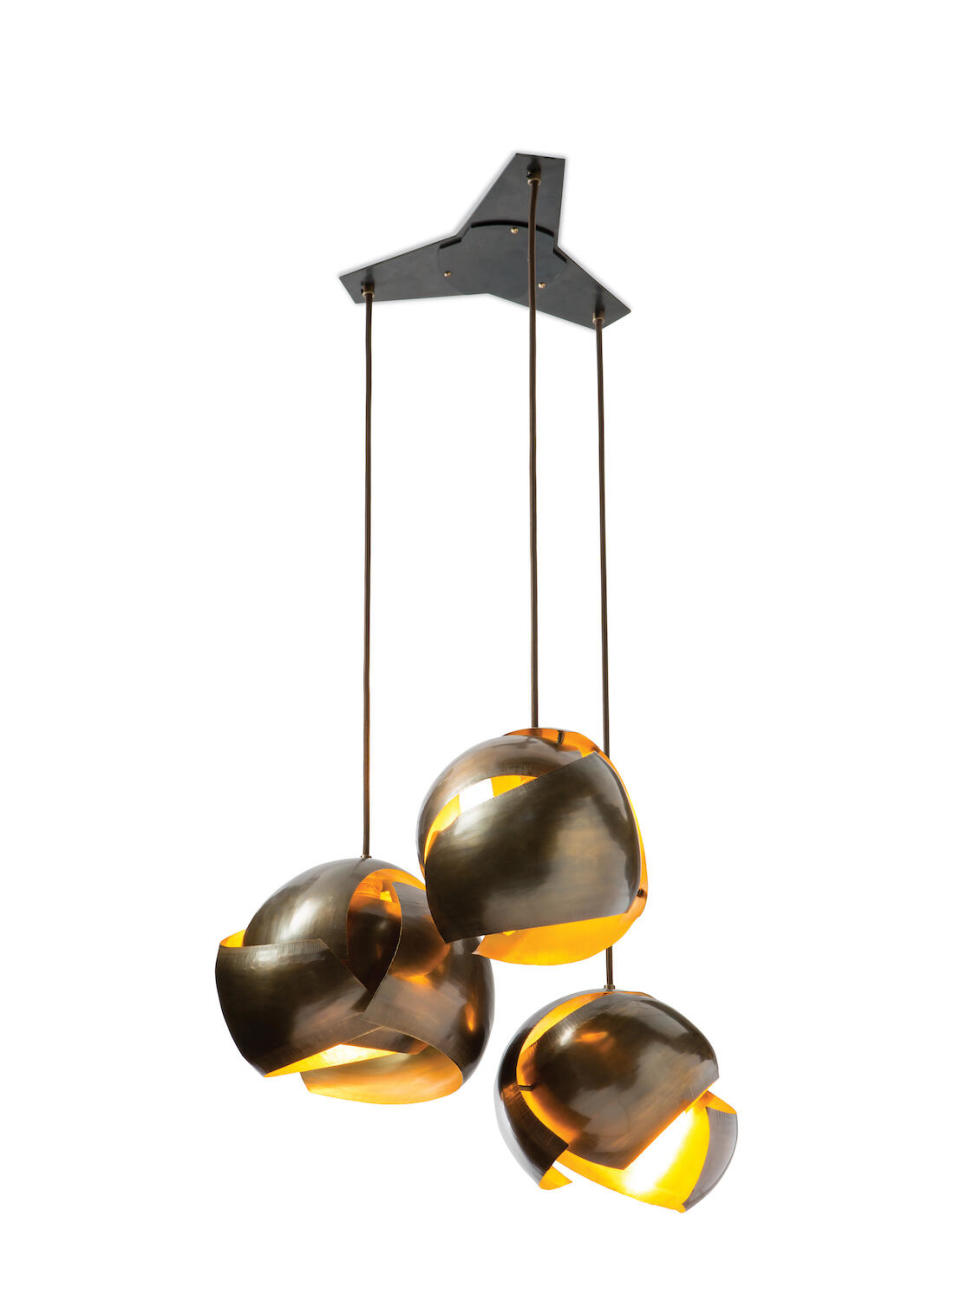 The Galapagos cluster pendant by Tuell and Reynolds